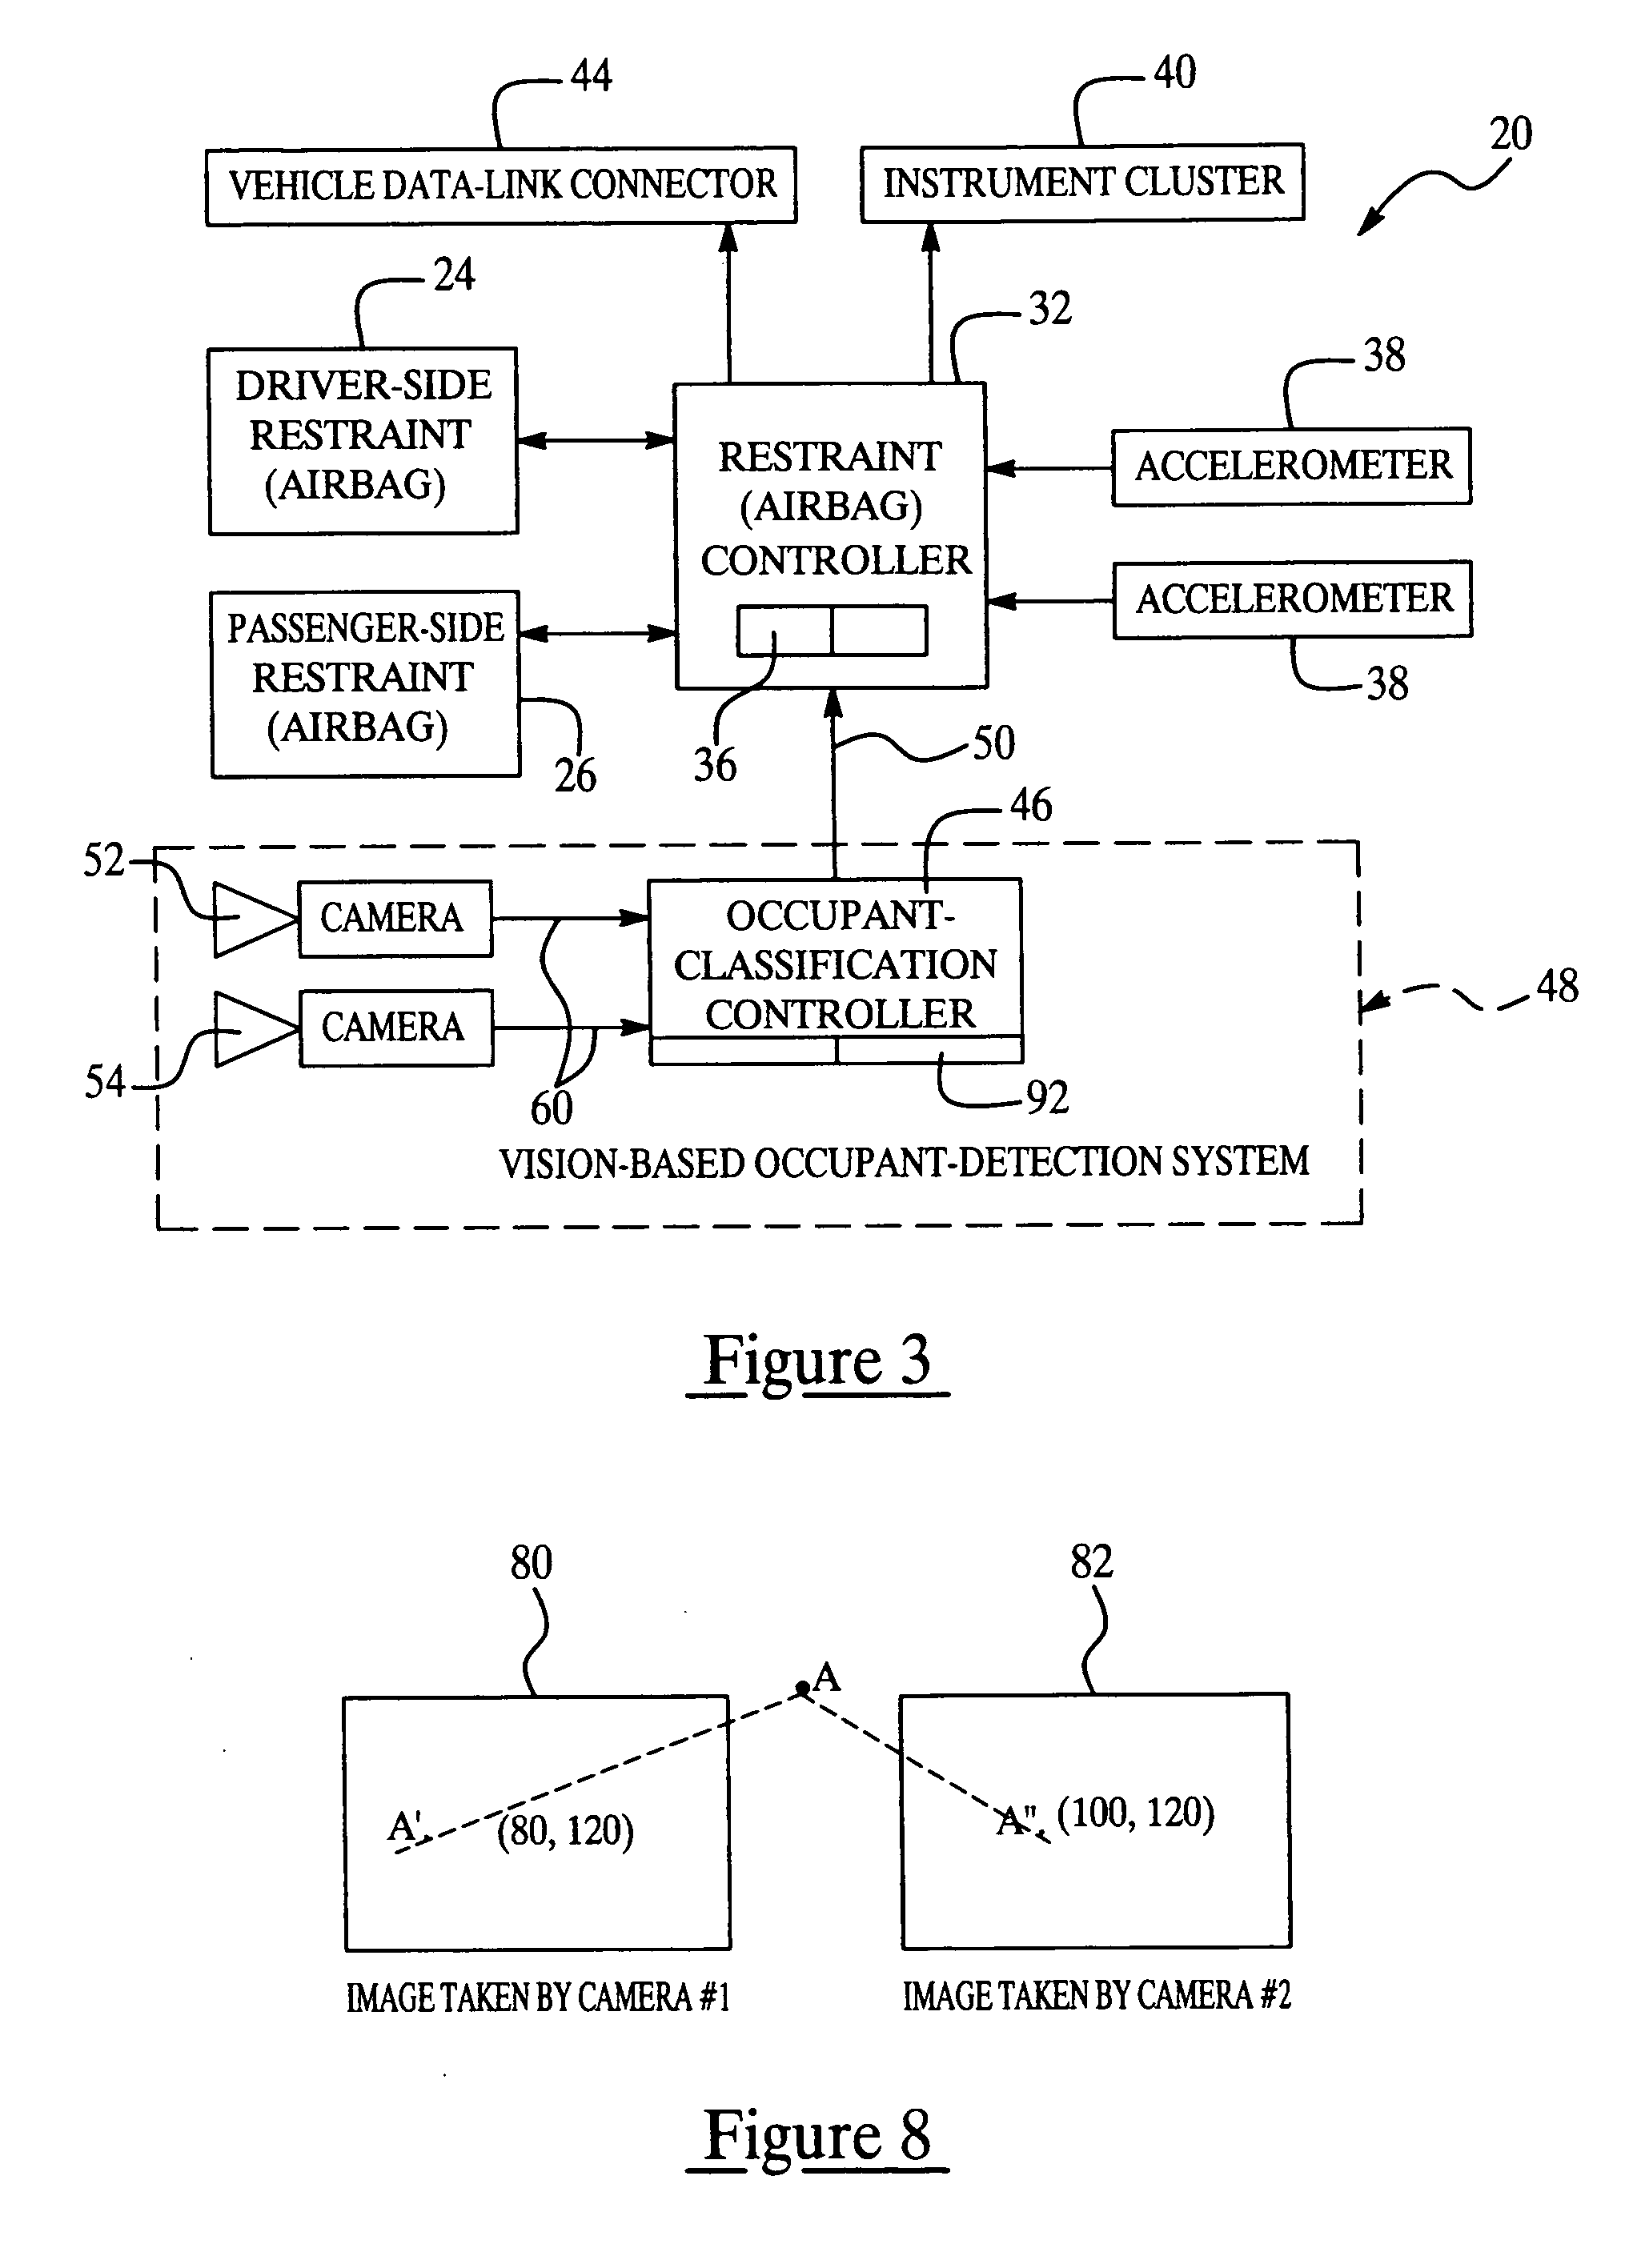 Vision-based occupant classification method and system for controlling airbag deployment in a vehicle restraint system